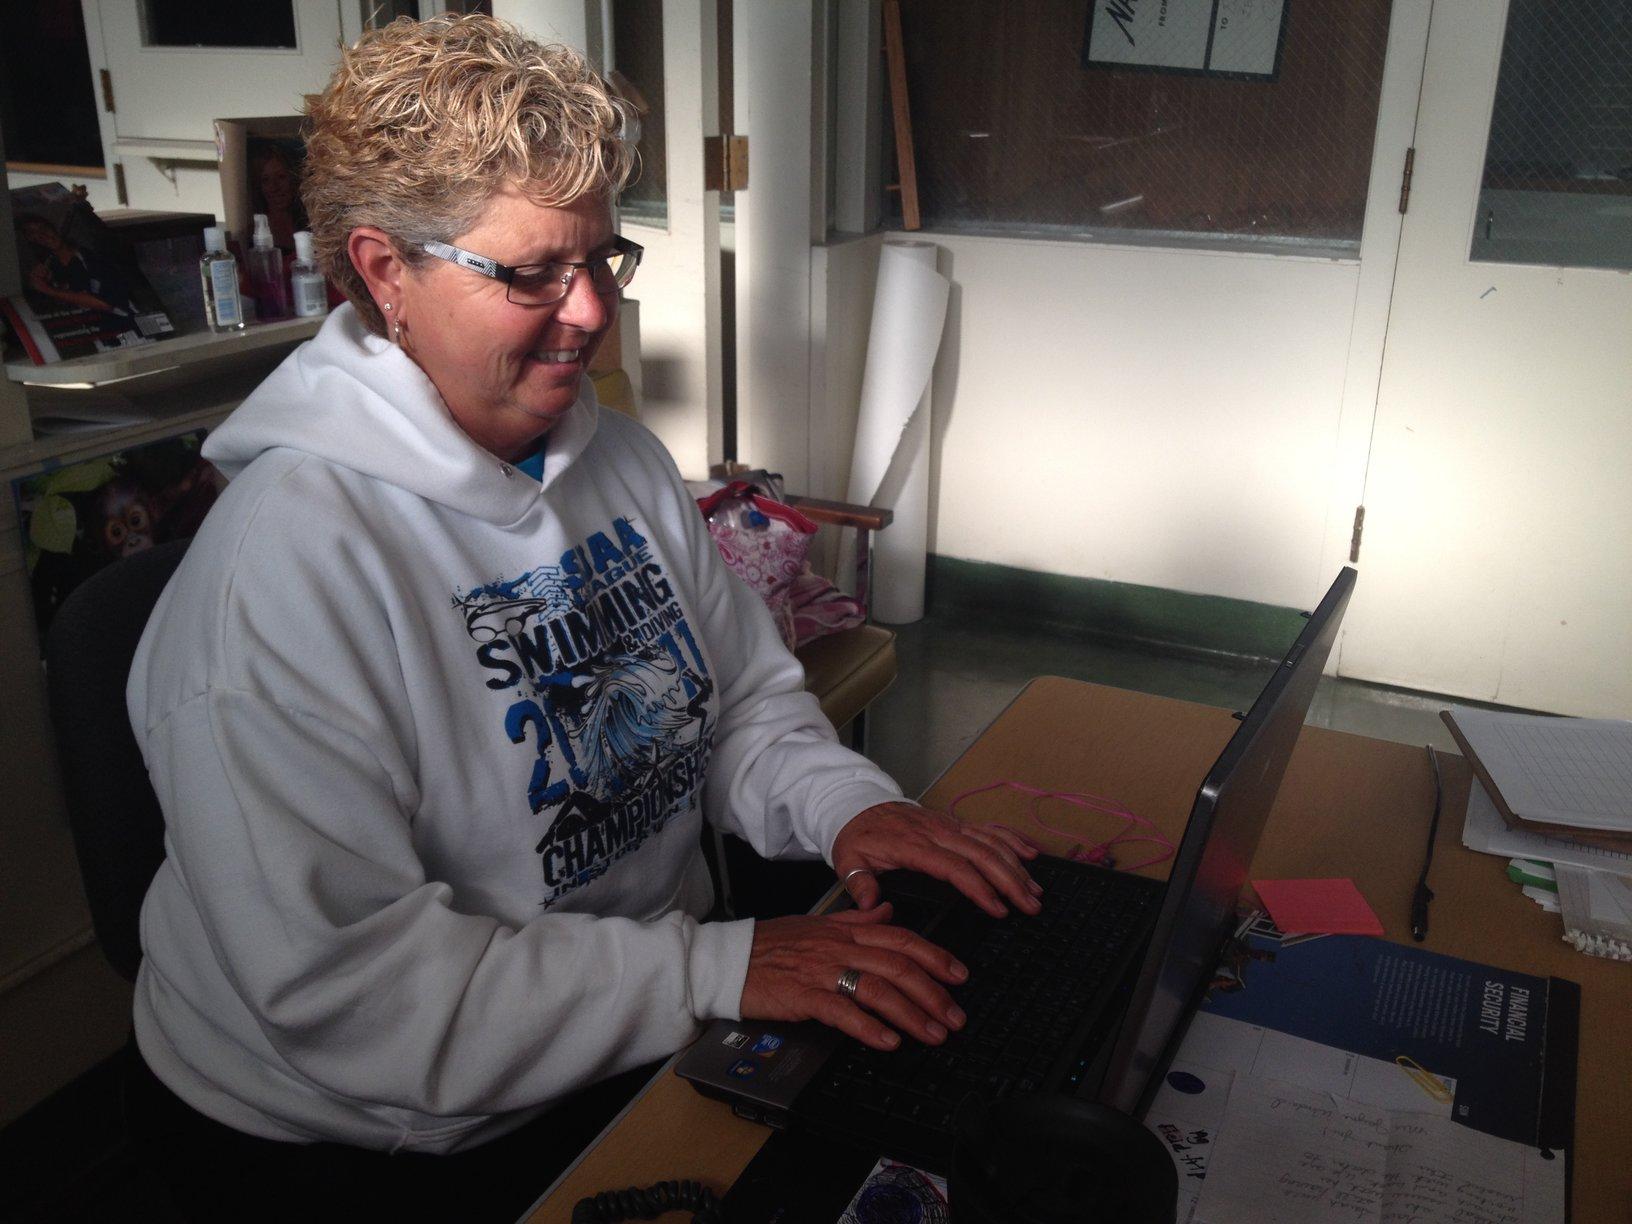 Special Education teacher Stacey Carniglia plans out the schedule for the week.